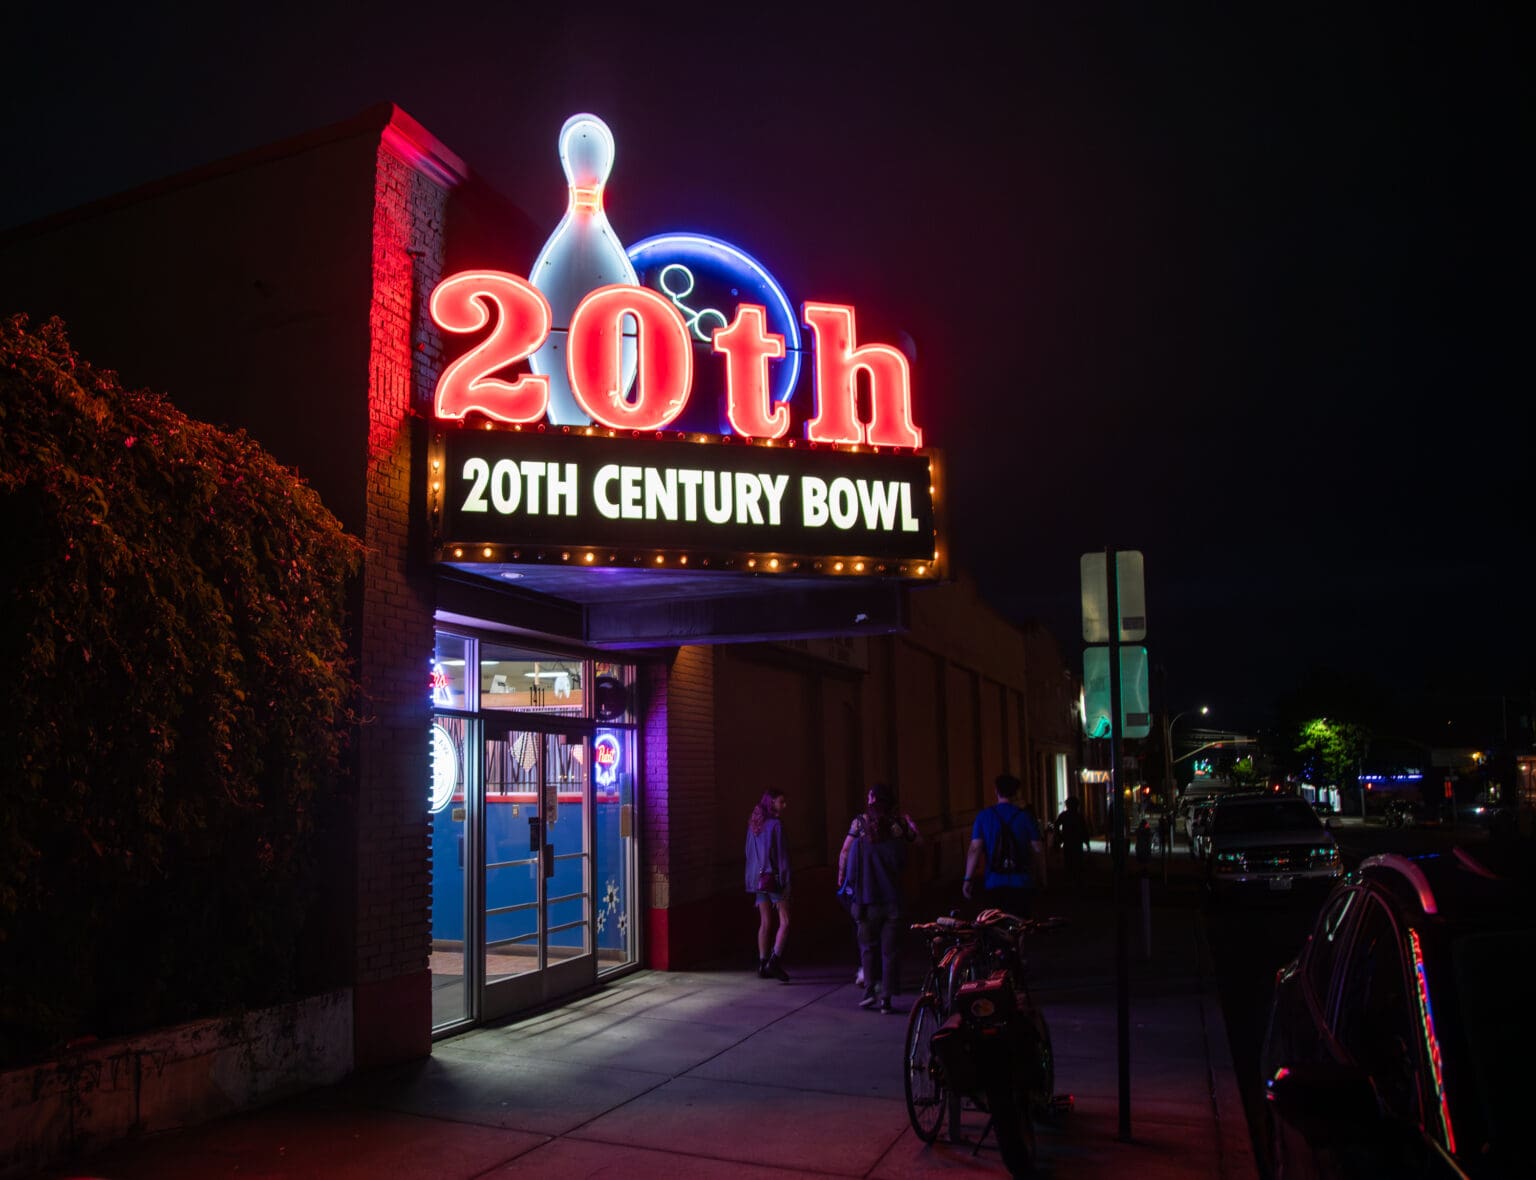 20th Century Bowl on State Street in Bellingham is one of three bowling centers in Whatcom County. Originally located on Railroad Avenue in the '50s and co-owned by Dick Brannian